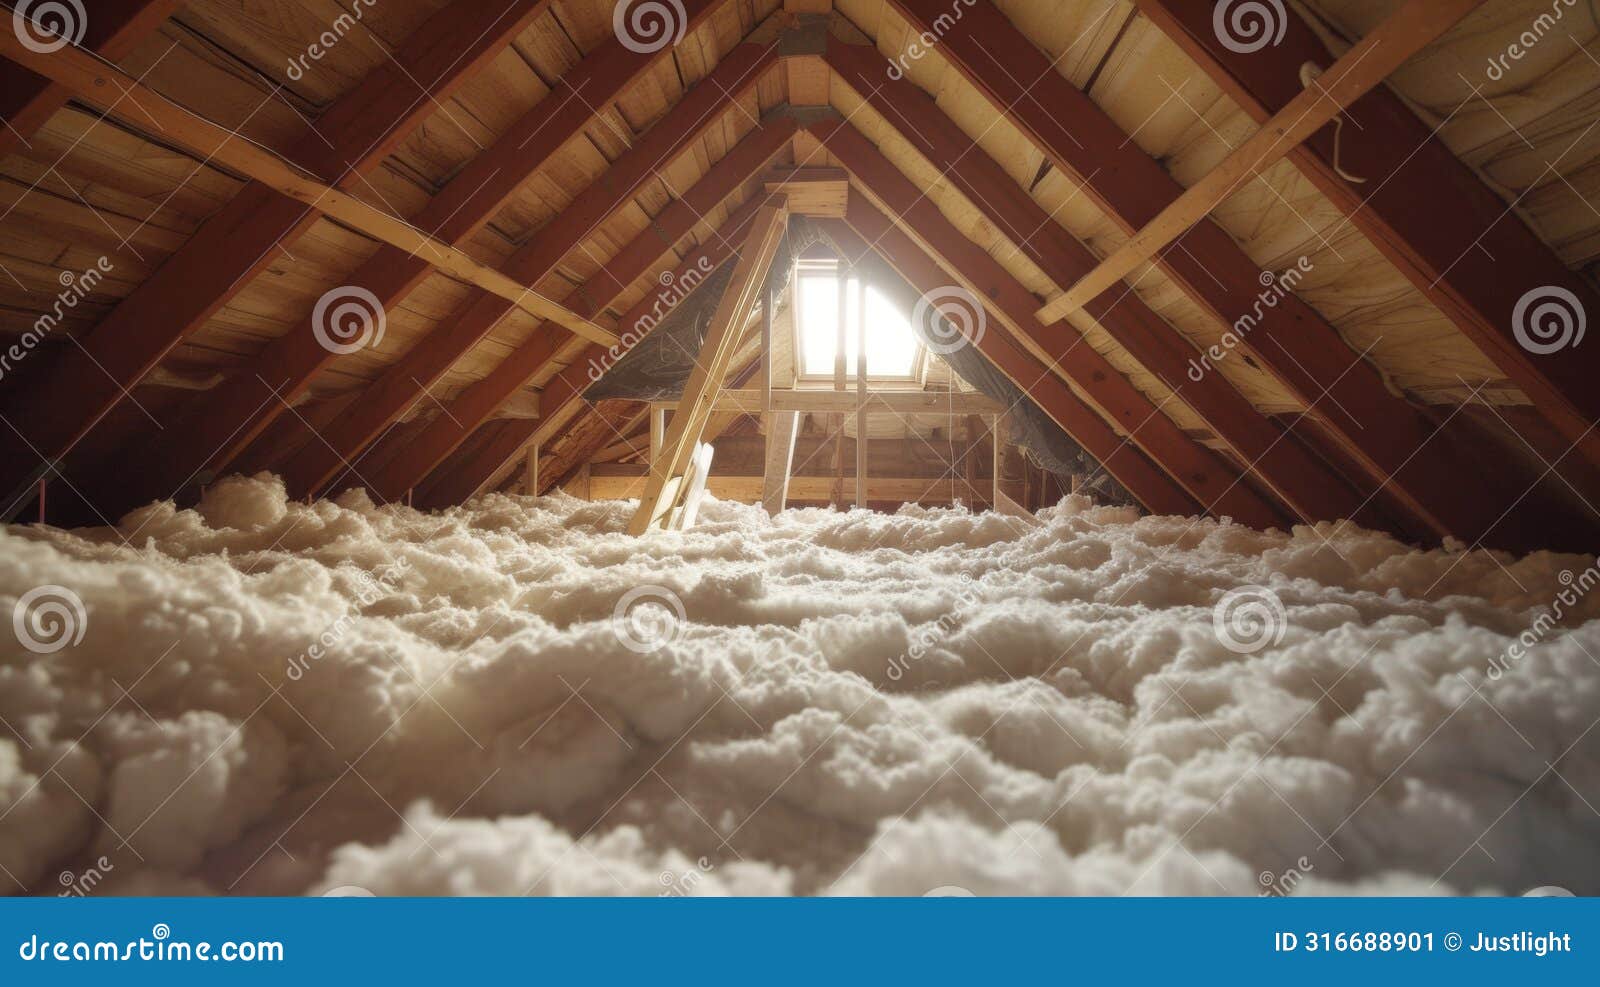 insulation being installed in the attic ensuring a comfortable and energyefficient home during both the freezing cold